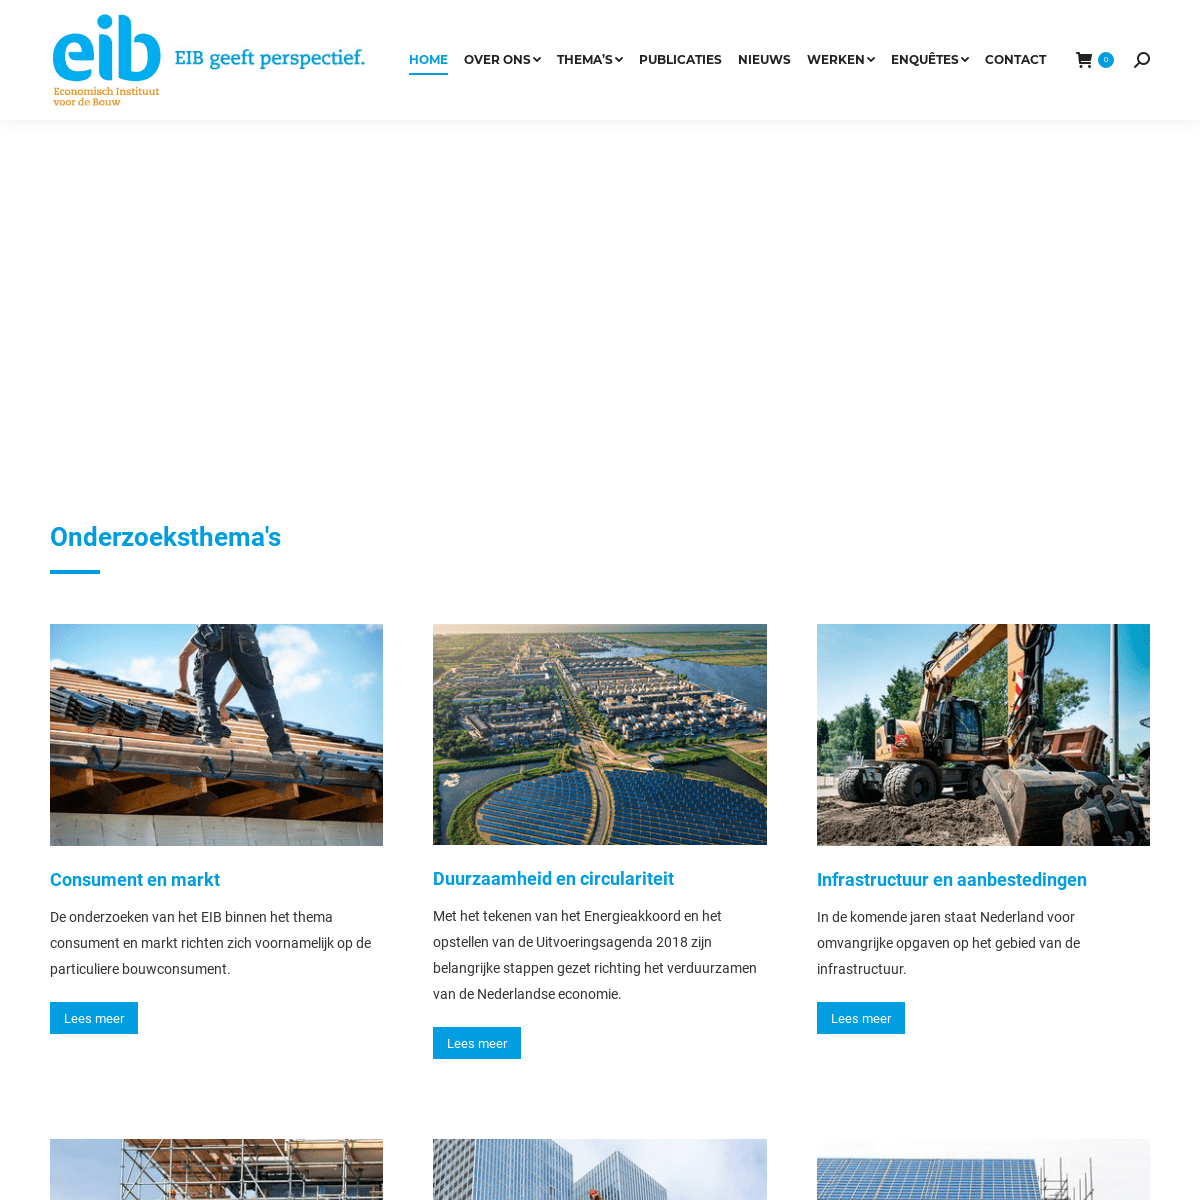 A complete backup of https://eib.nl